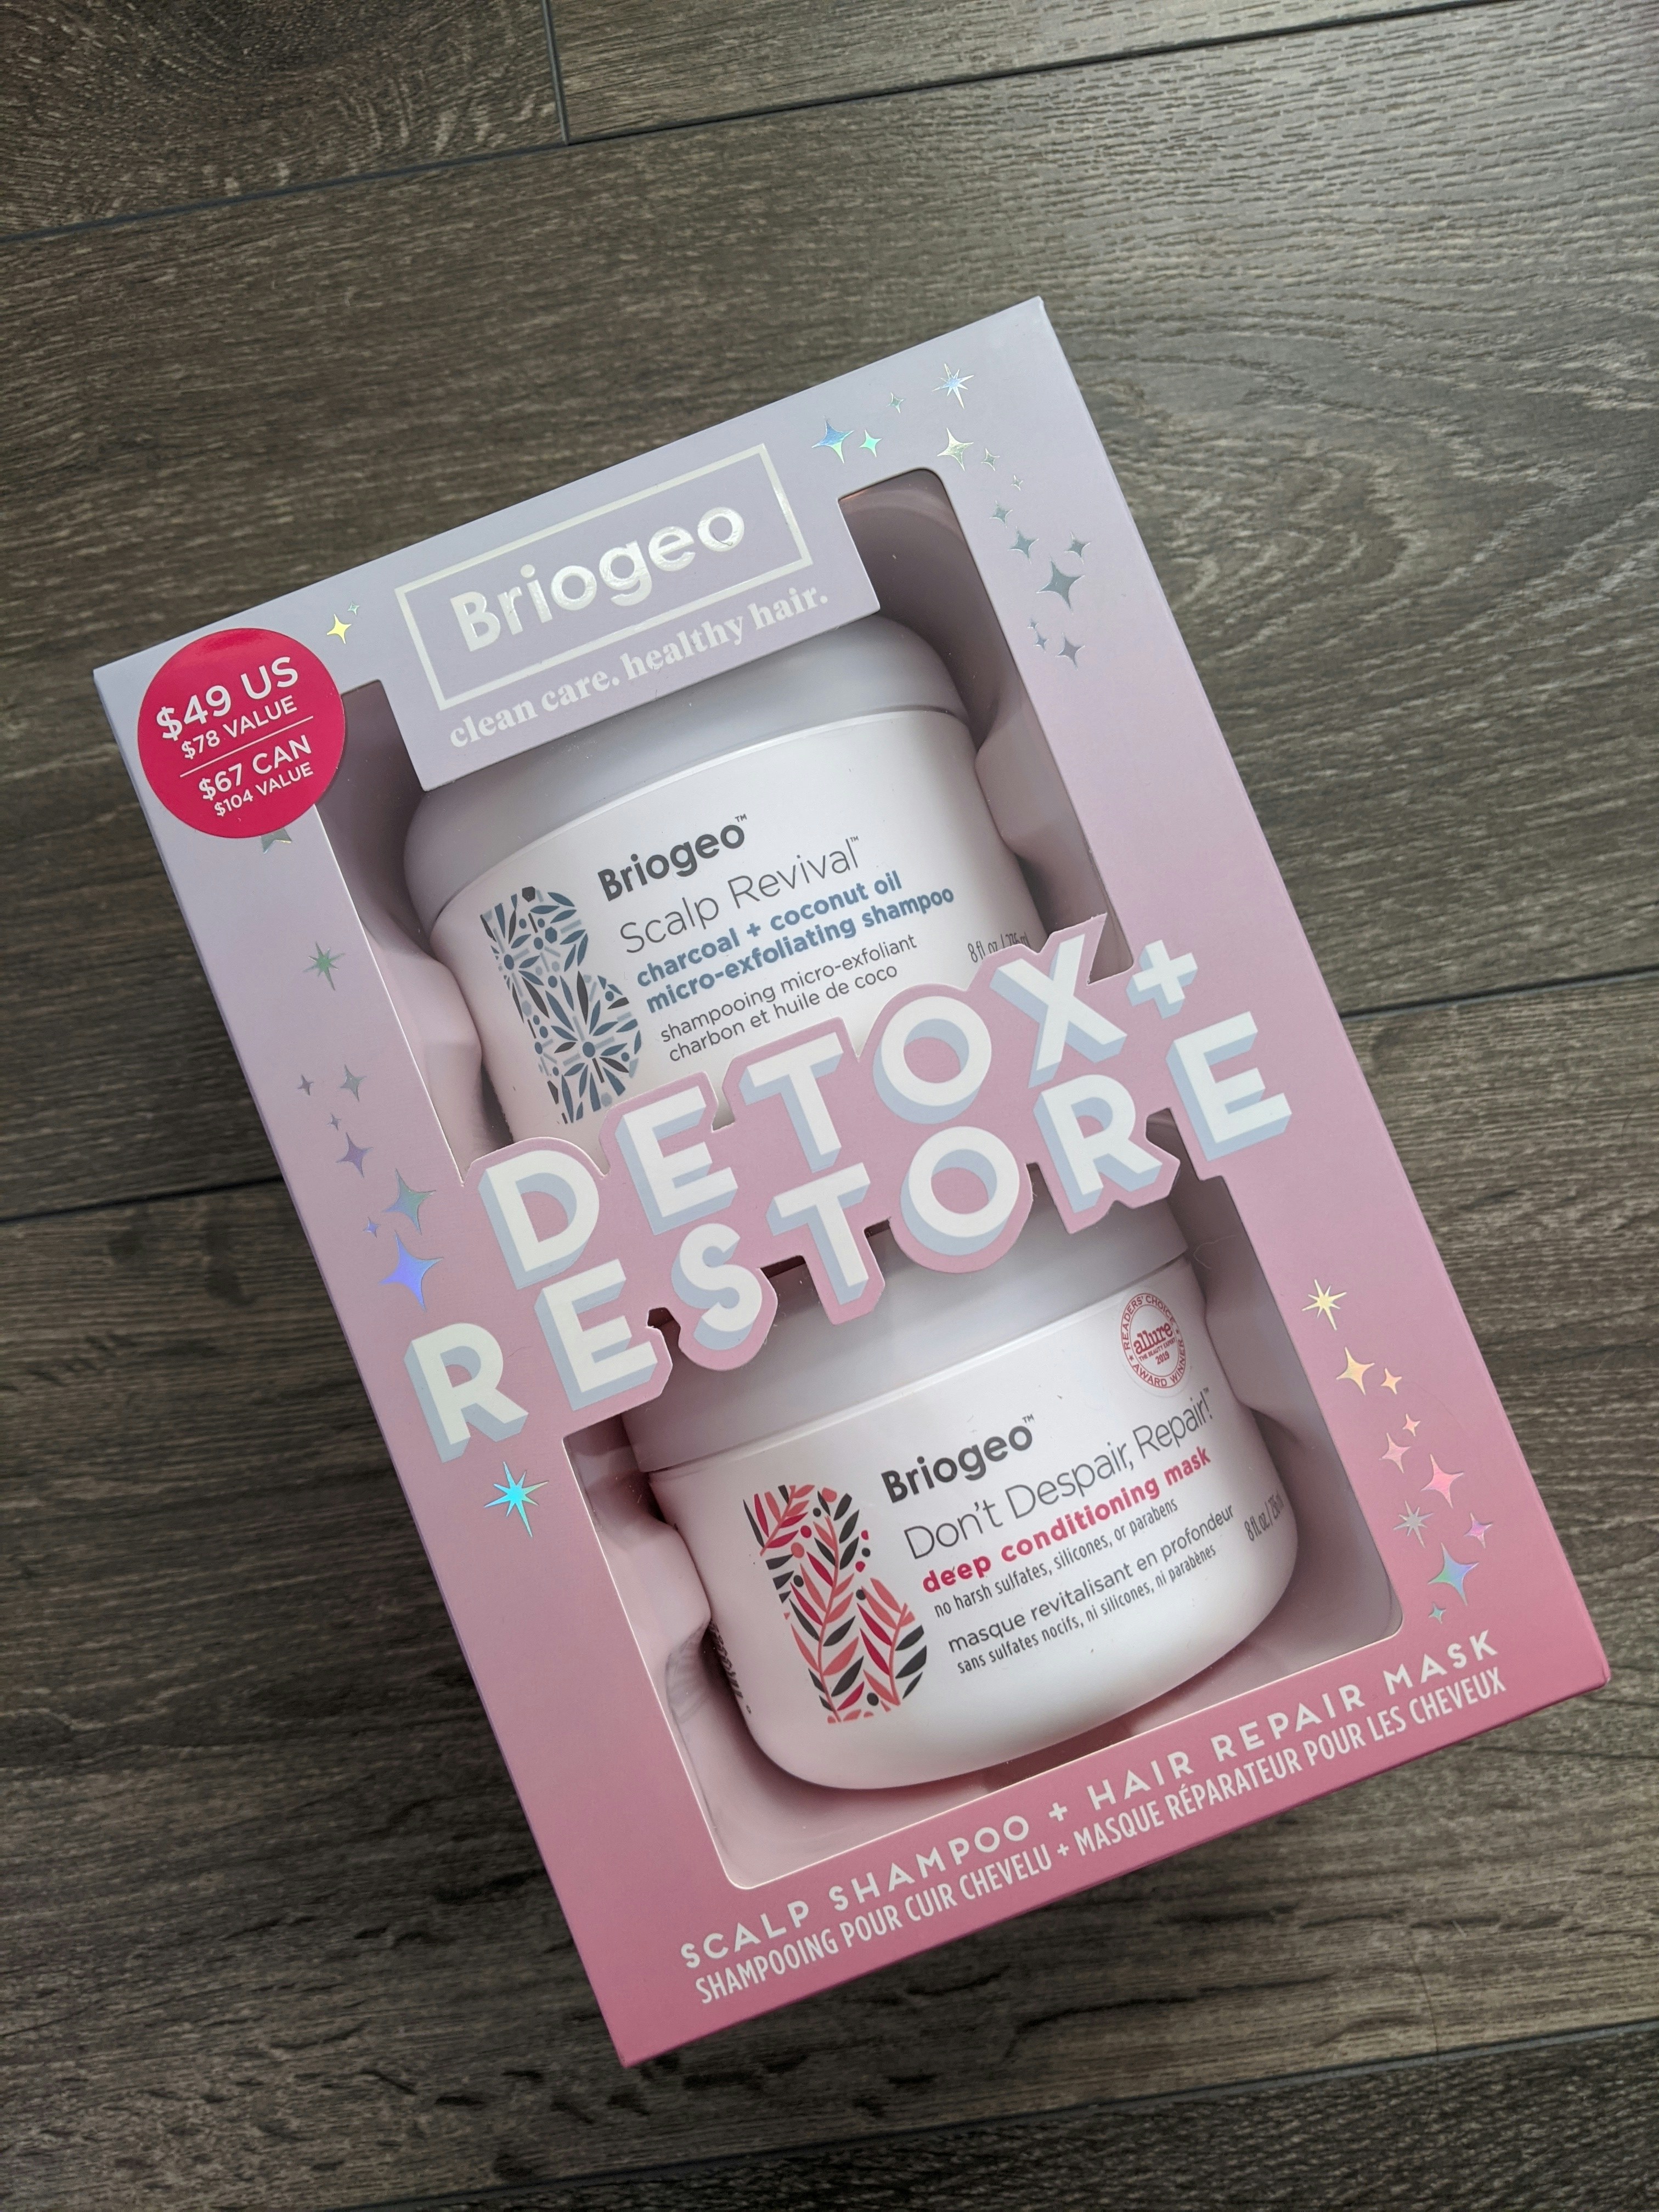 Briogeo Detox + Restore Value Set: the best hair mask and exfoliating shampoo from a black-owned cruelty-free brand. 